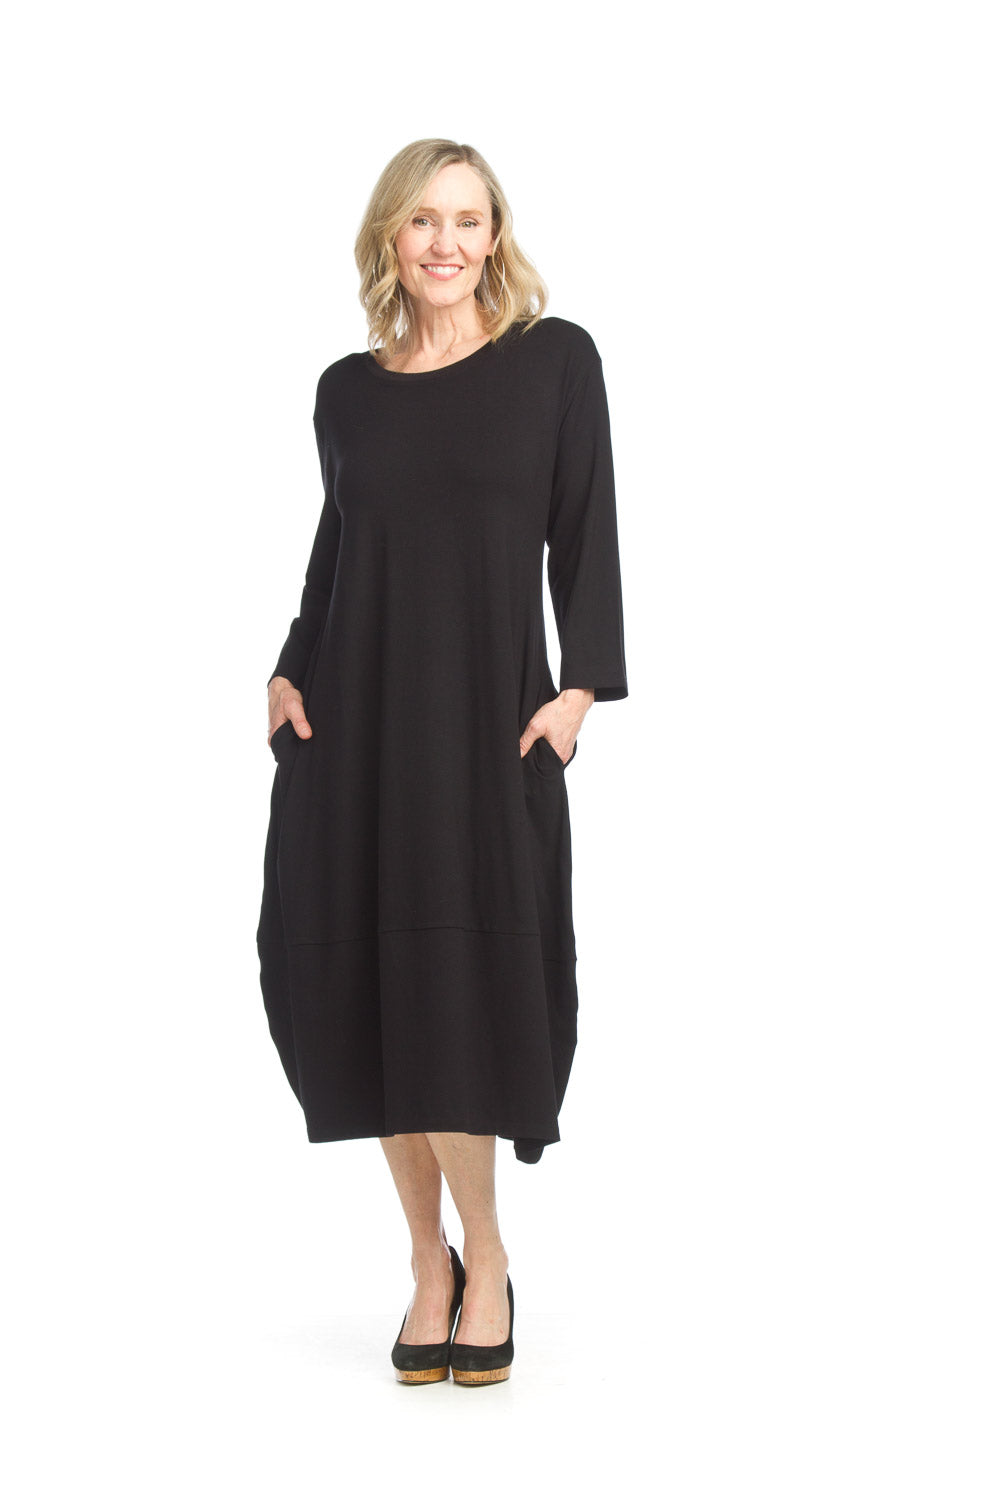 PD-15537 3/4 SLEEVE BAMBOO KNIT DRESS WITH POCKETS